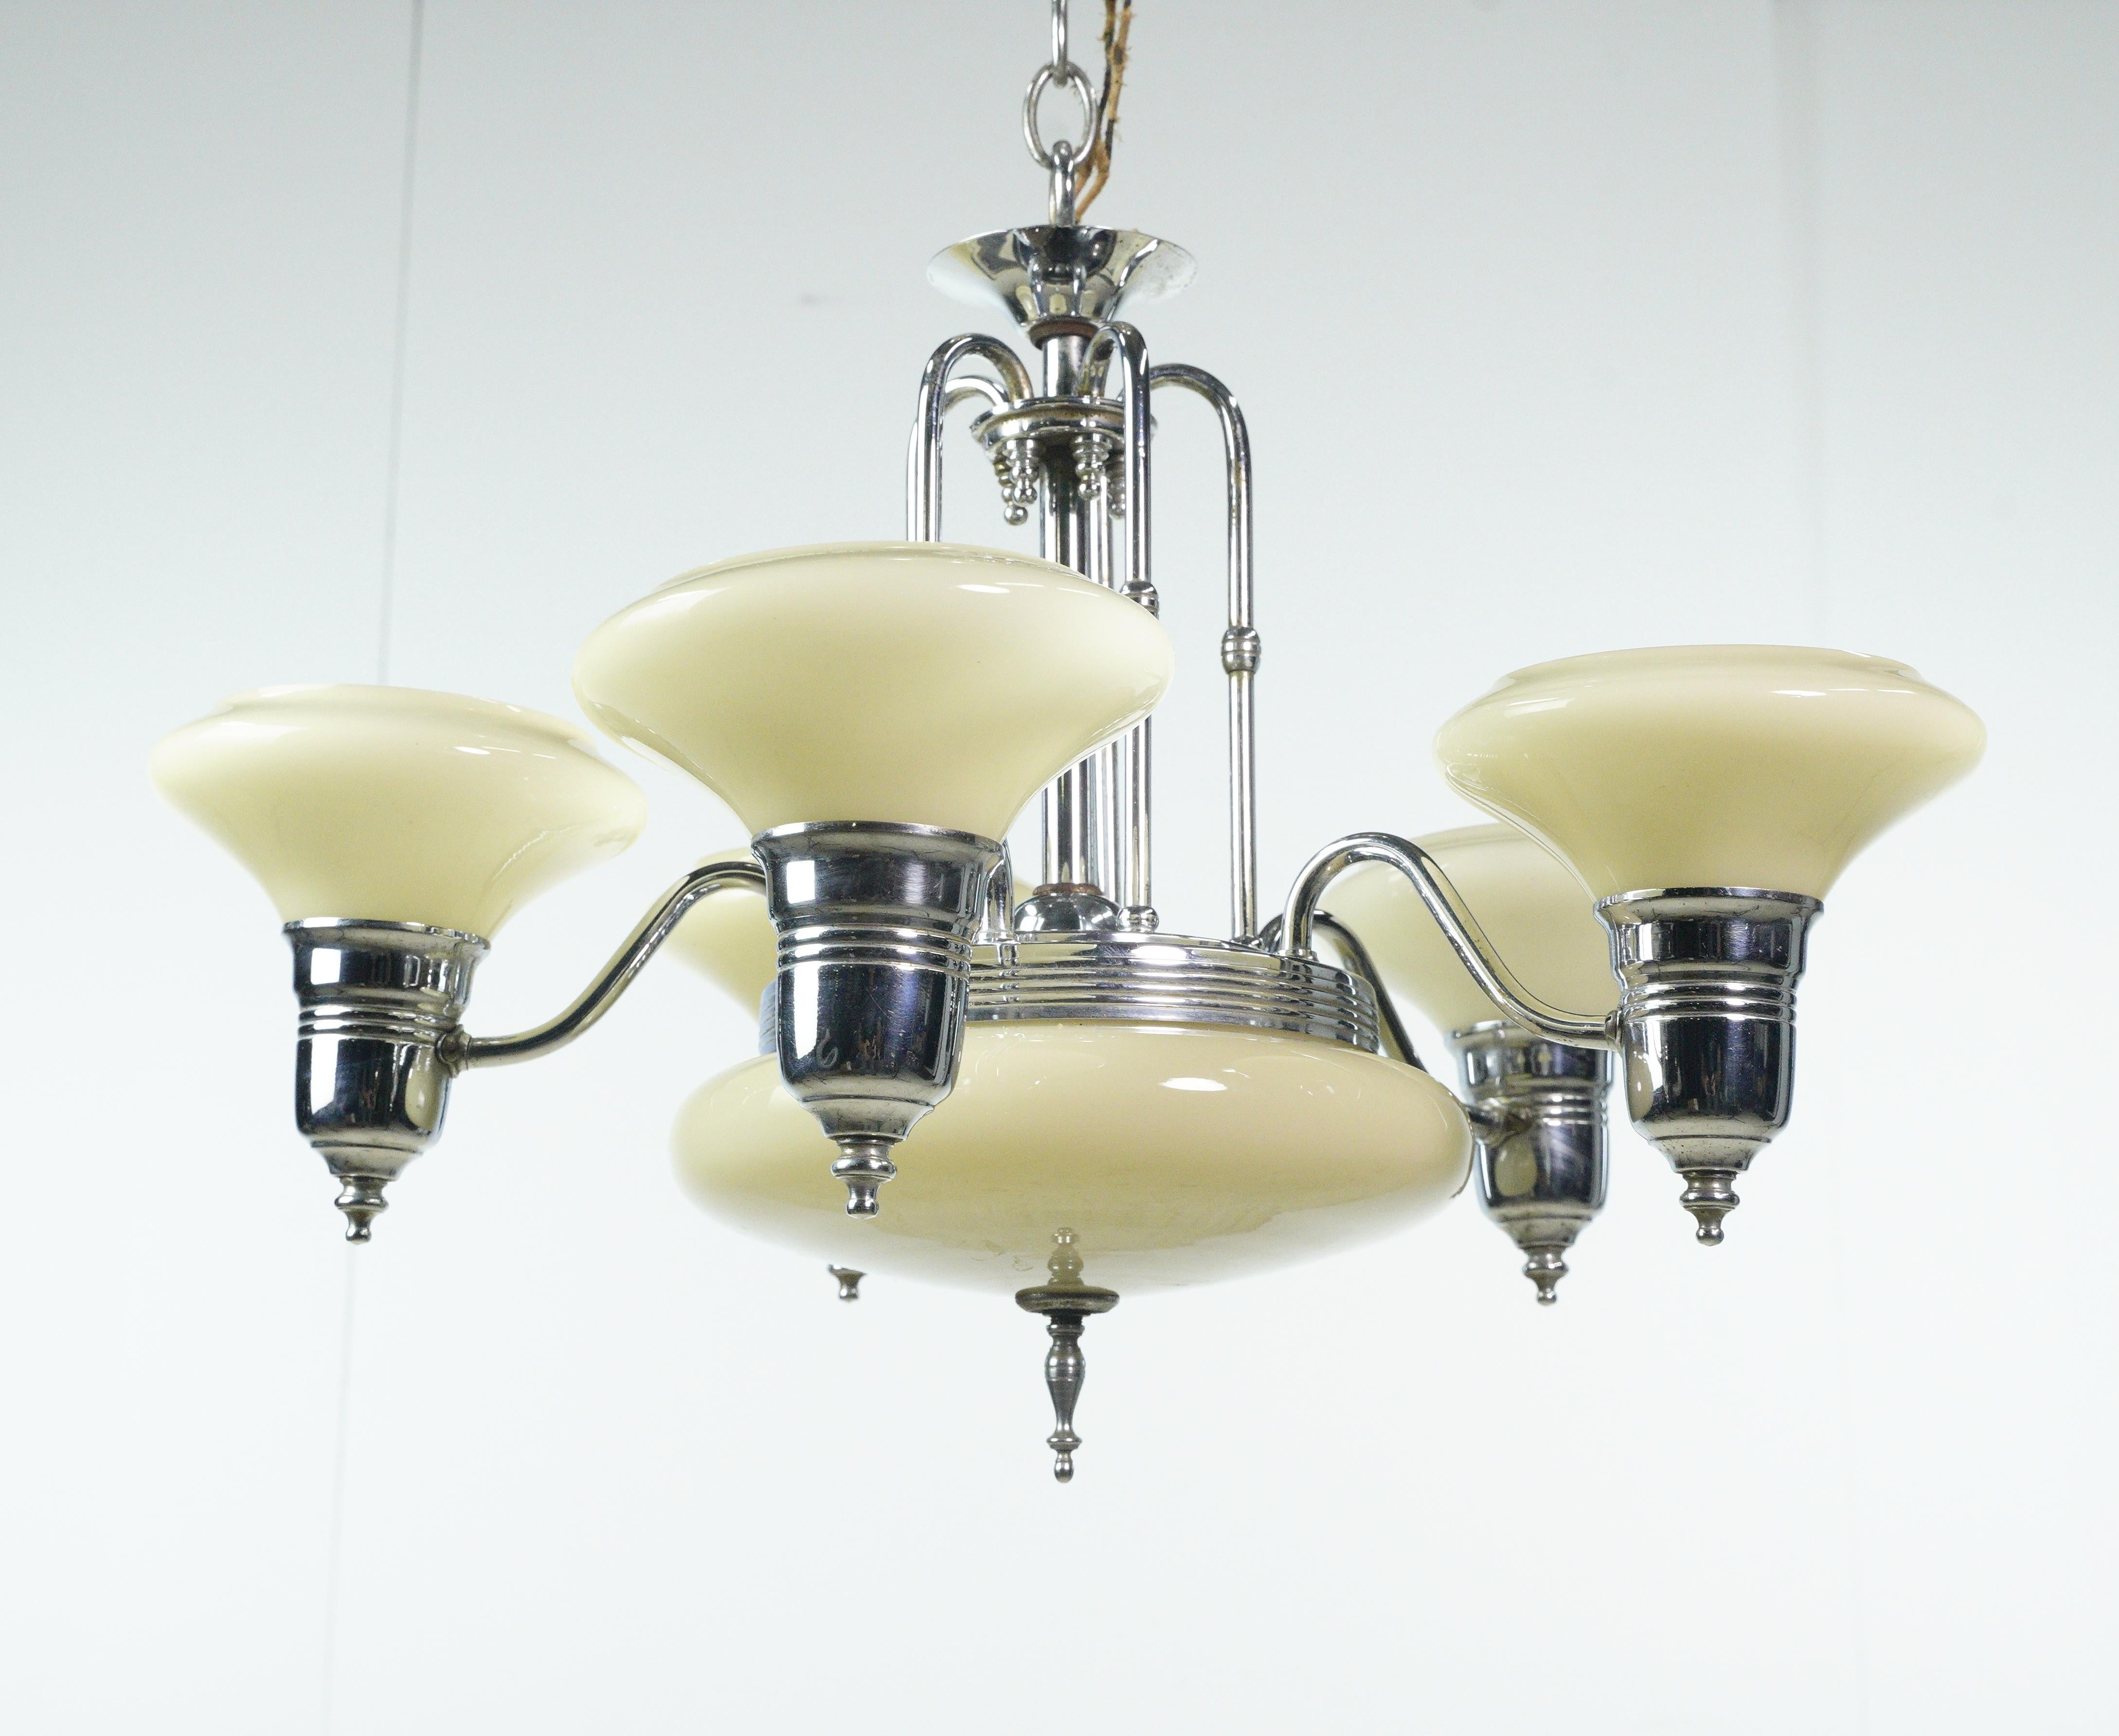 This 1950s Art Deco chandelier is a stylish lighting fixture featuring off white glass slip shades, an off white glass base shade, and a five arm steel frame construction. It captures the essence of Art Deco design, adding a touch of retro elegance